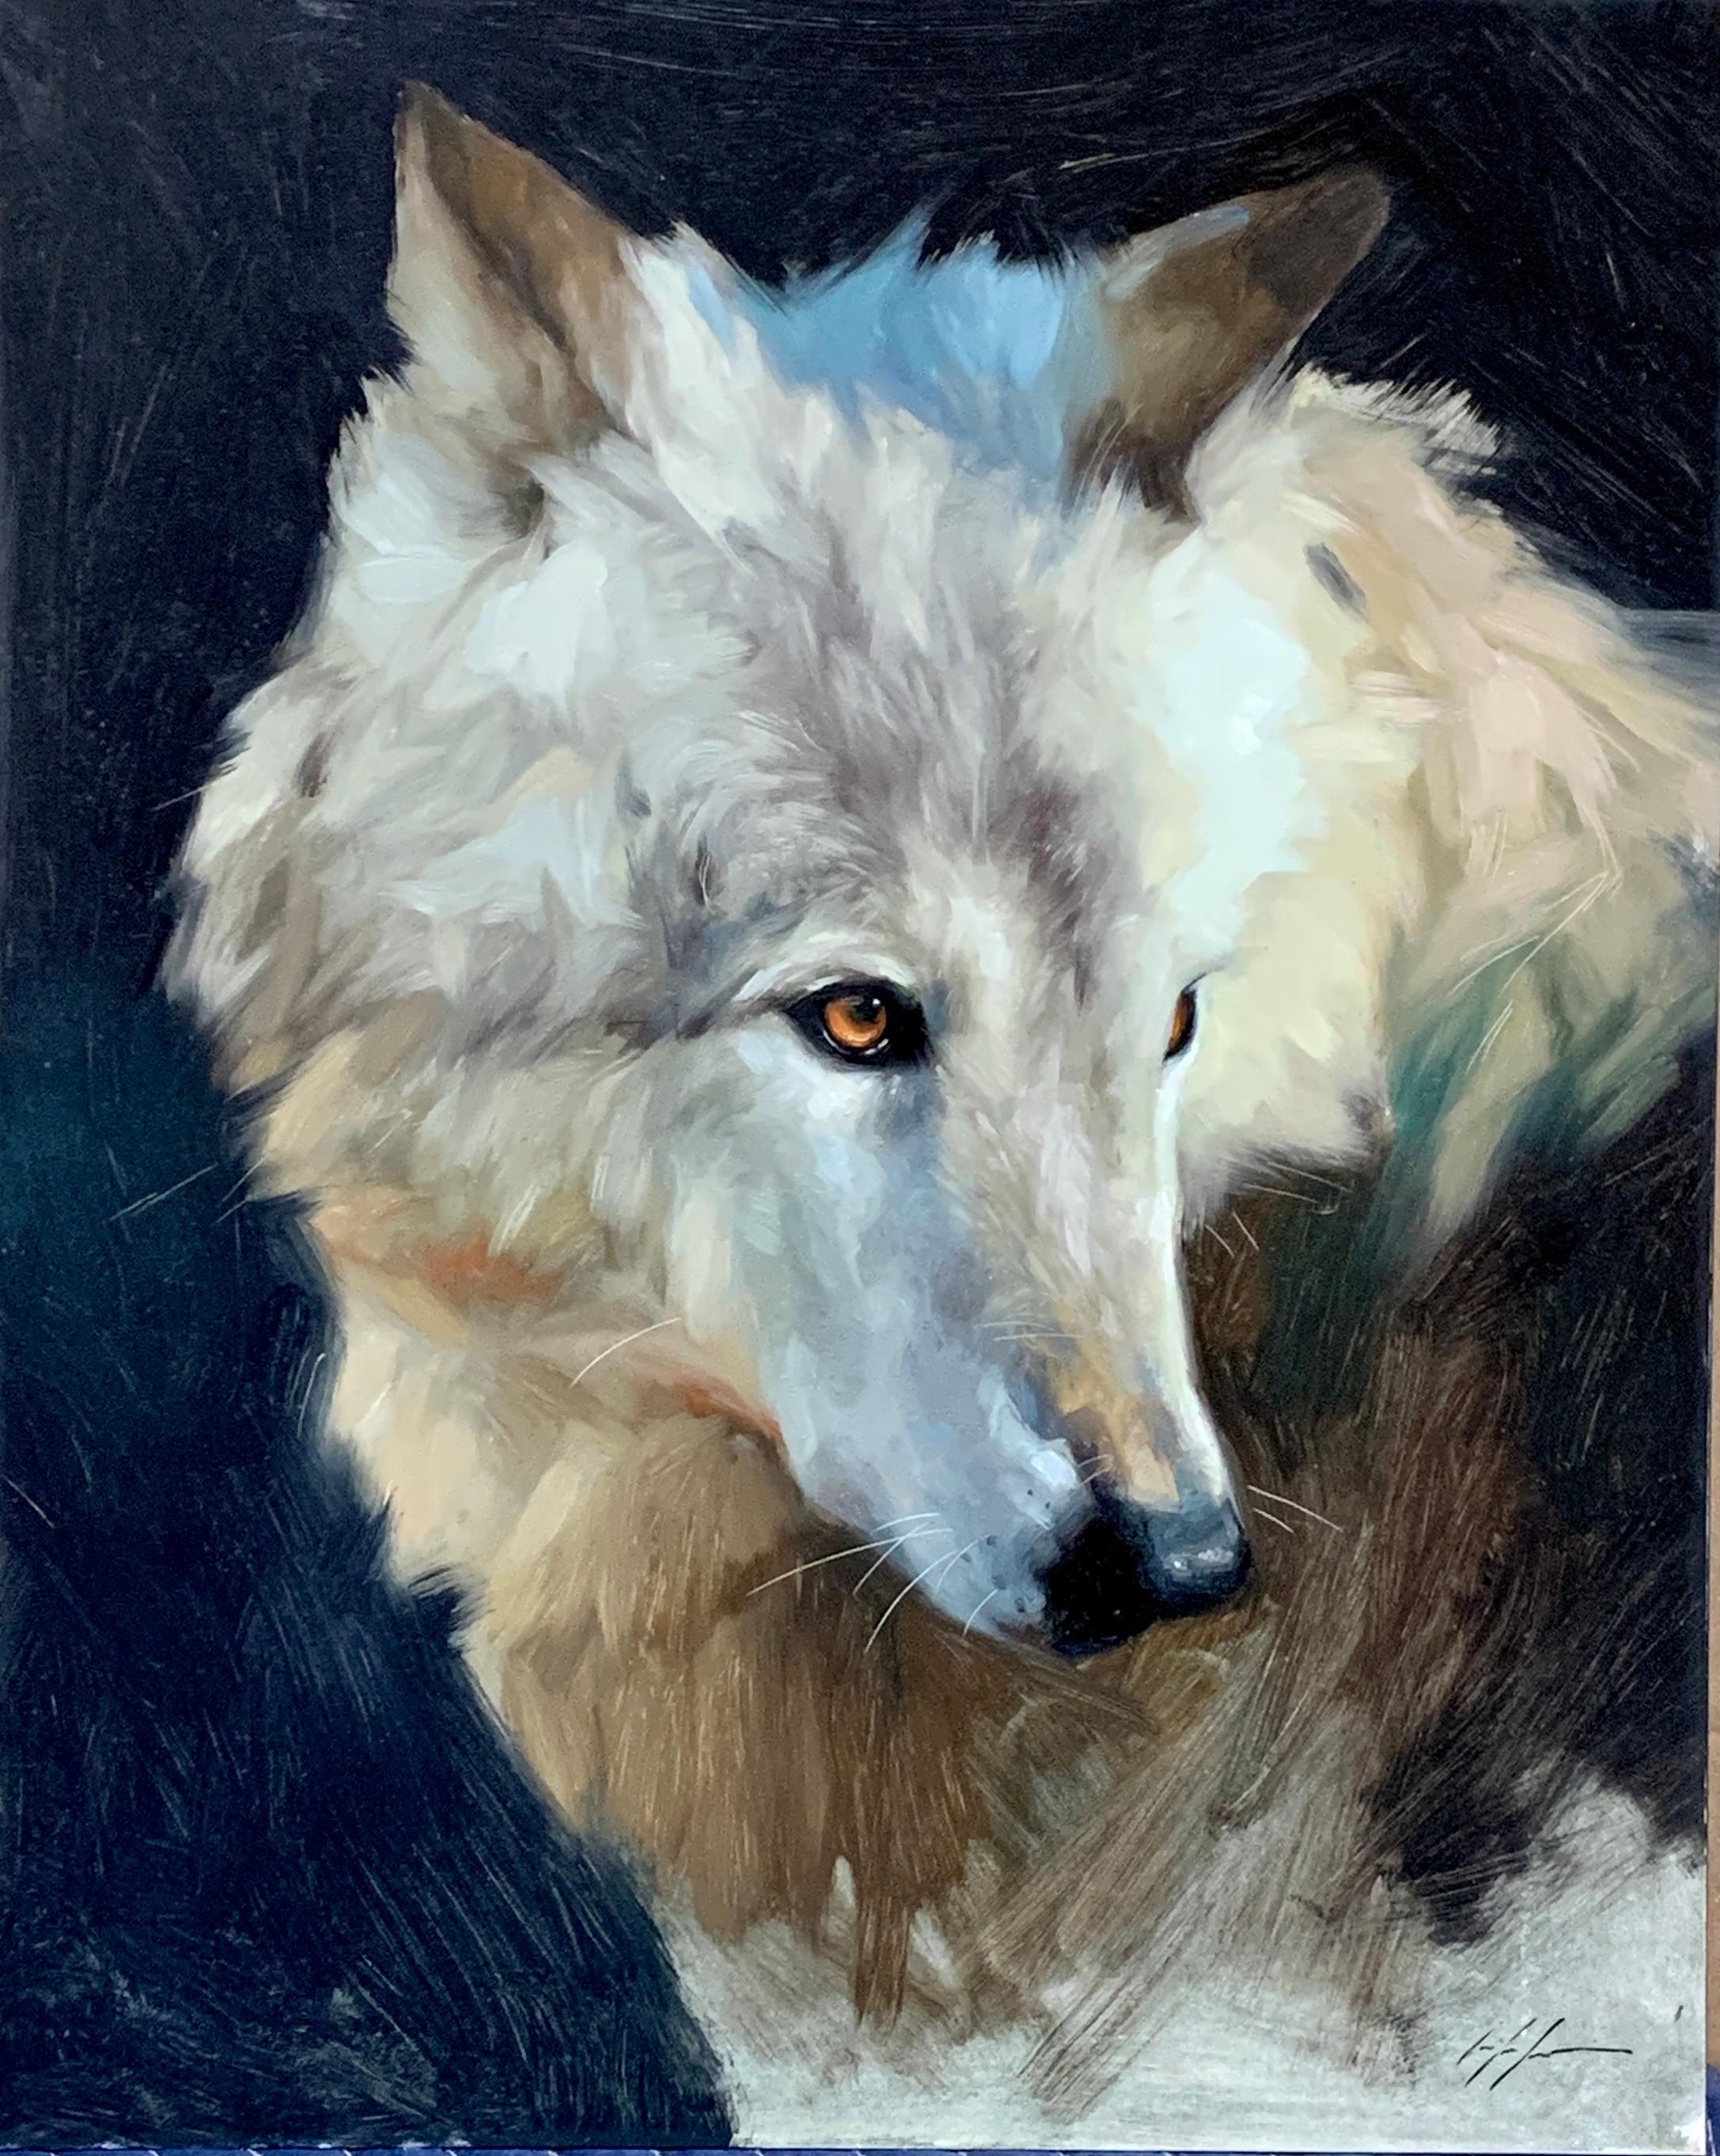 Jennifer Gennari Animal Painting - Realistic portrait study of an American Wolf, in a landscape